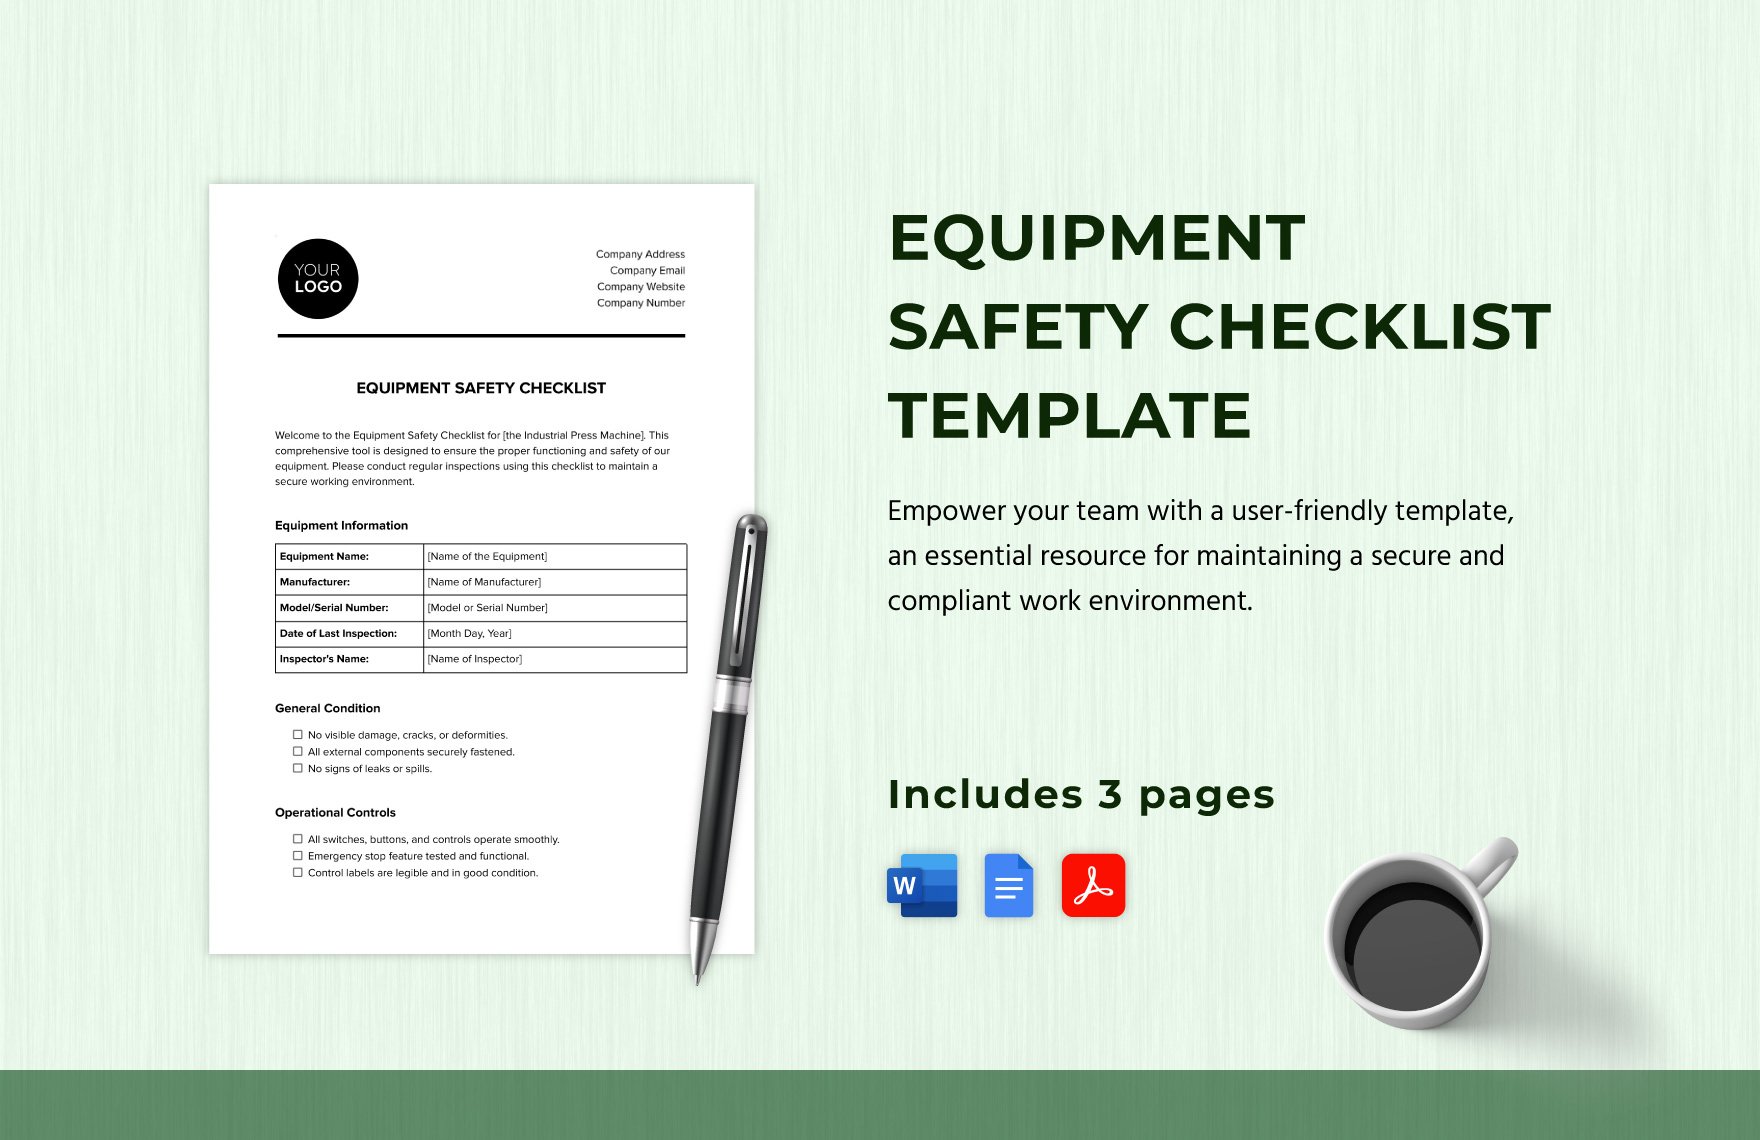 Equipment Safety Checklist Template in Word, Google Docs, PDF